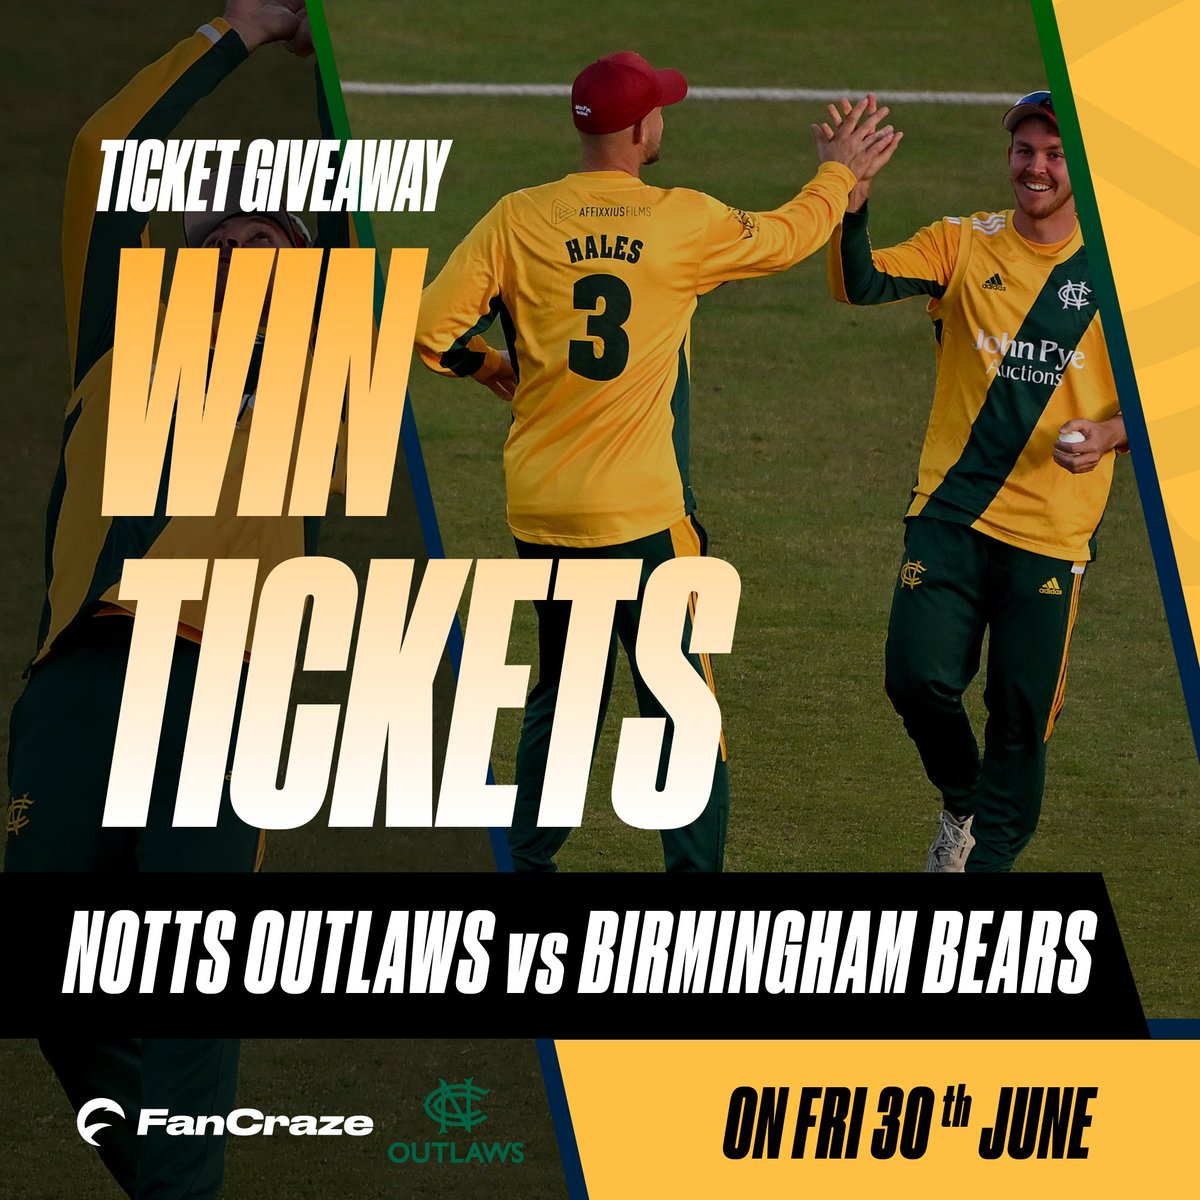 𝐁𝐥𝐚𝐬𝐭 𝐢𝐬 𝐛𝐚𝐜𝐤...

🏹 Win two tickets for Friday’s game!

To enter, comment with the name of your favourite Outlaws player…

👫🏻 Double your chances of winning by tagging a friend

Contest ends on June 29, 12pm BST.

@0xFanCraze
#FanCraze #OwnYourLegacy #MoreThanAGame